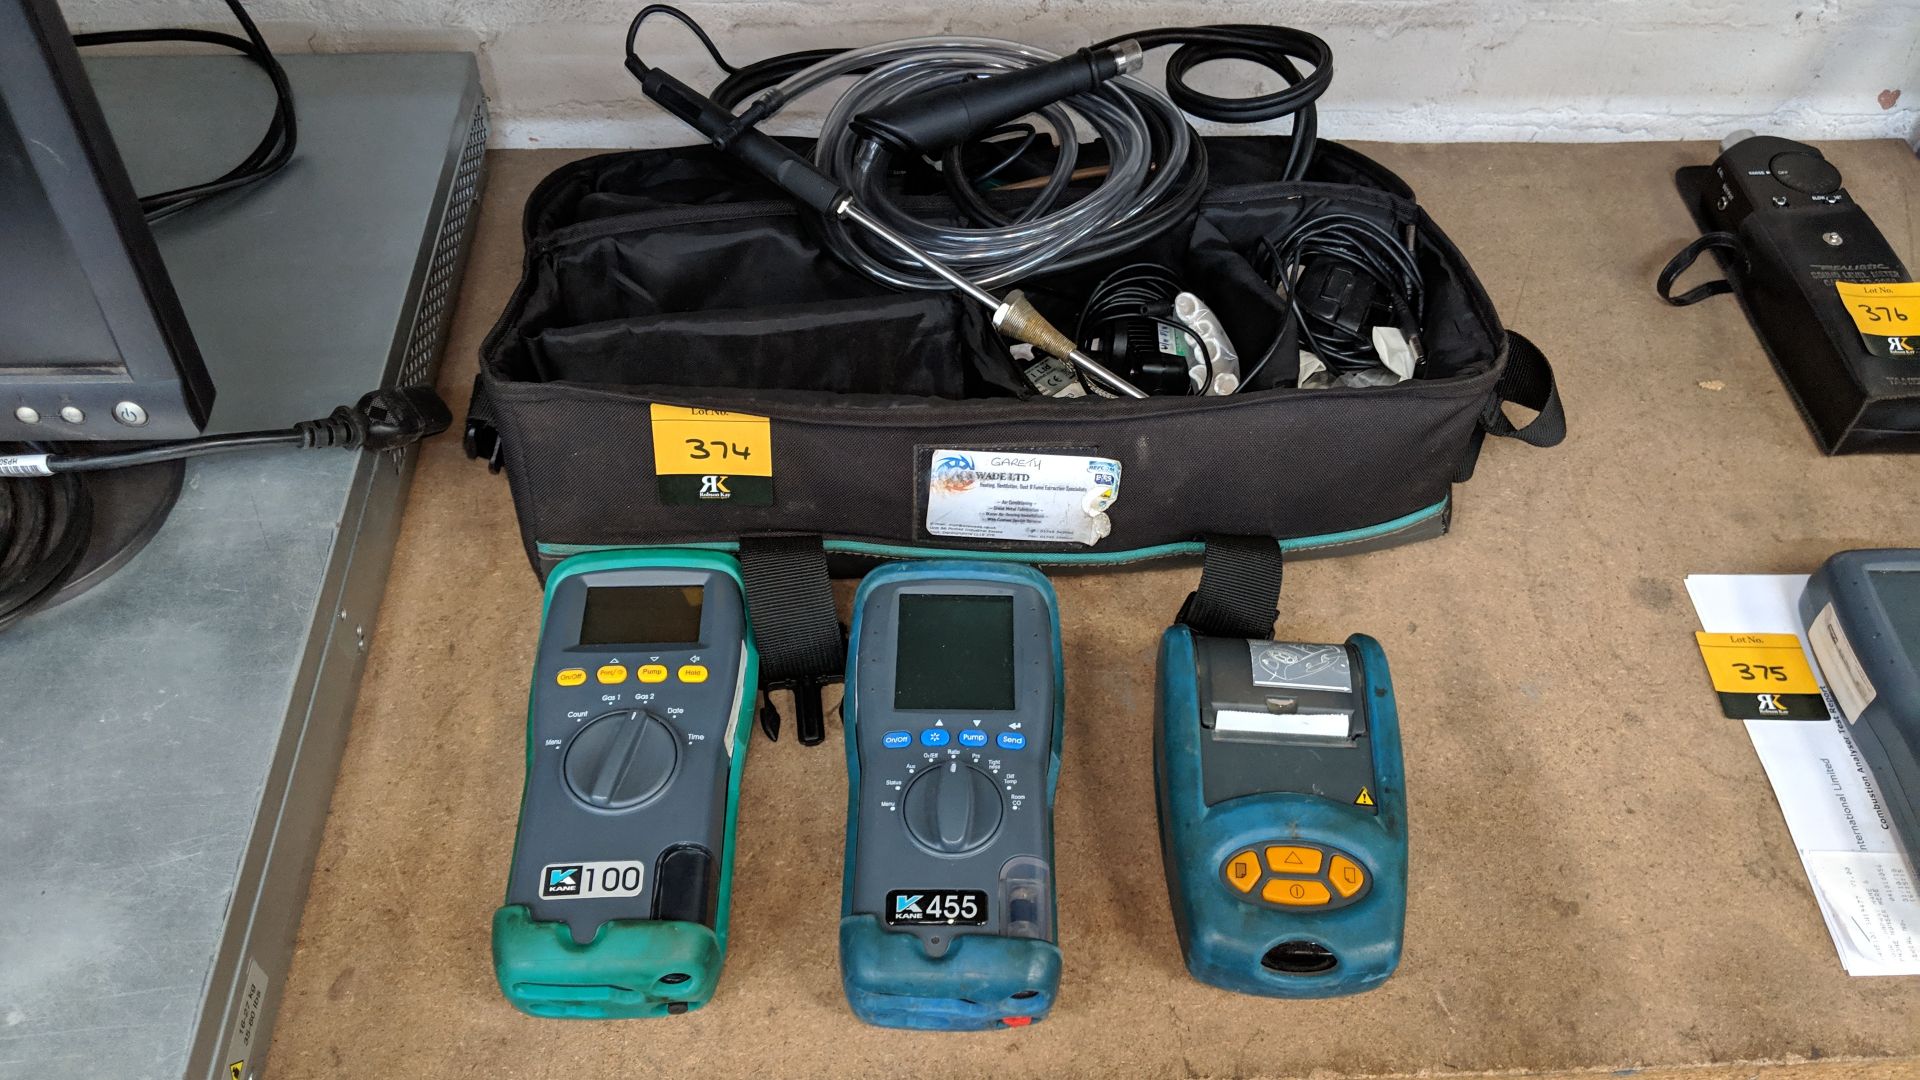 Kane combustion testing equipment lot comprising model 100 and 455 testing devices, portable - Image 5 of 5